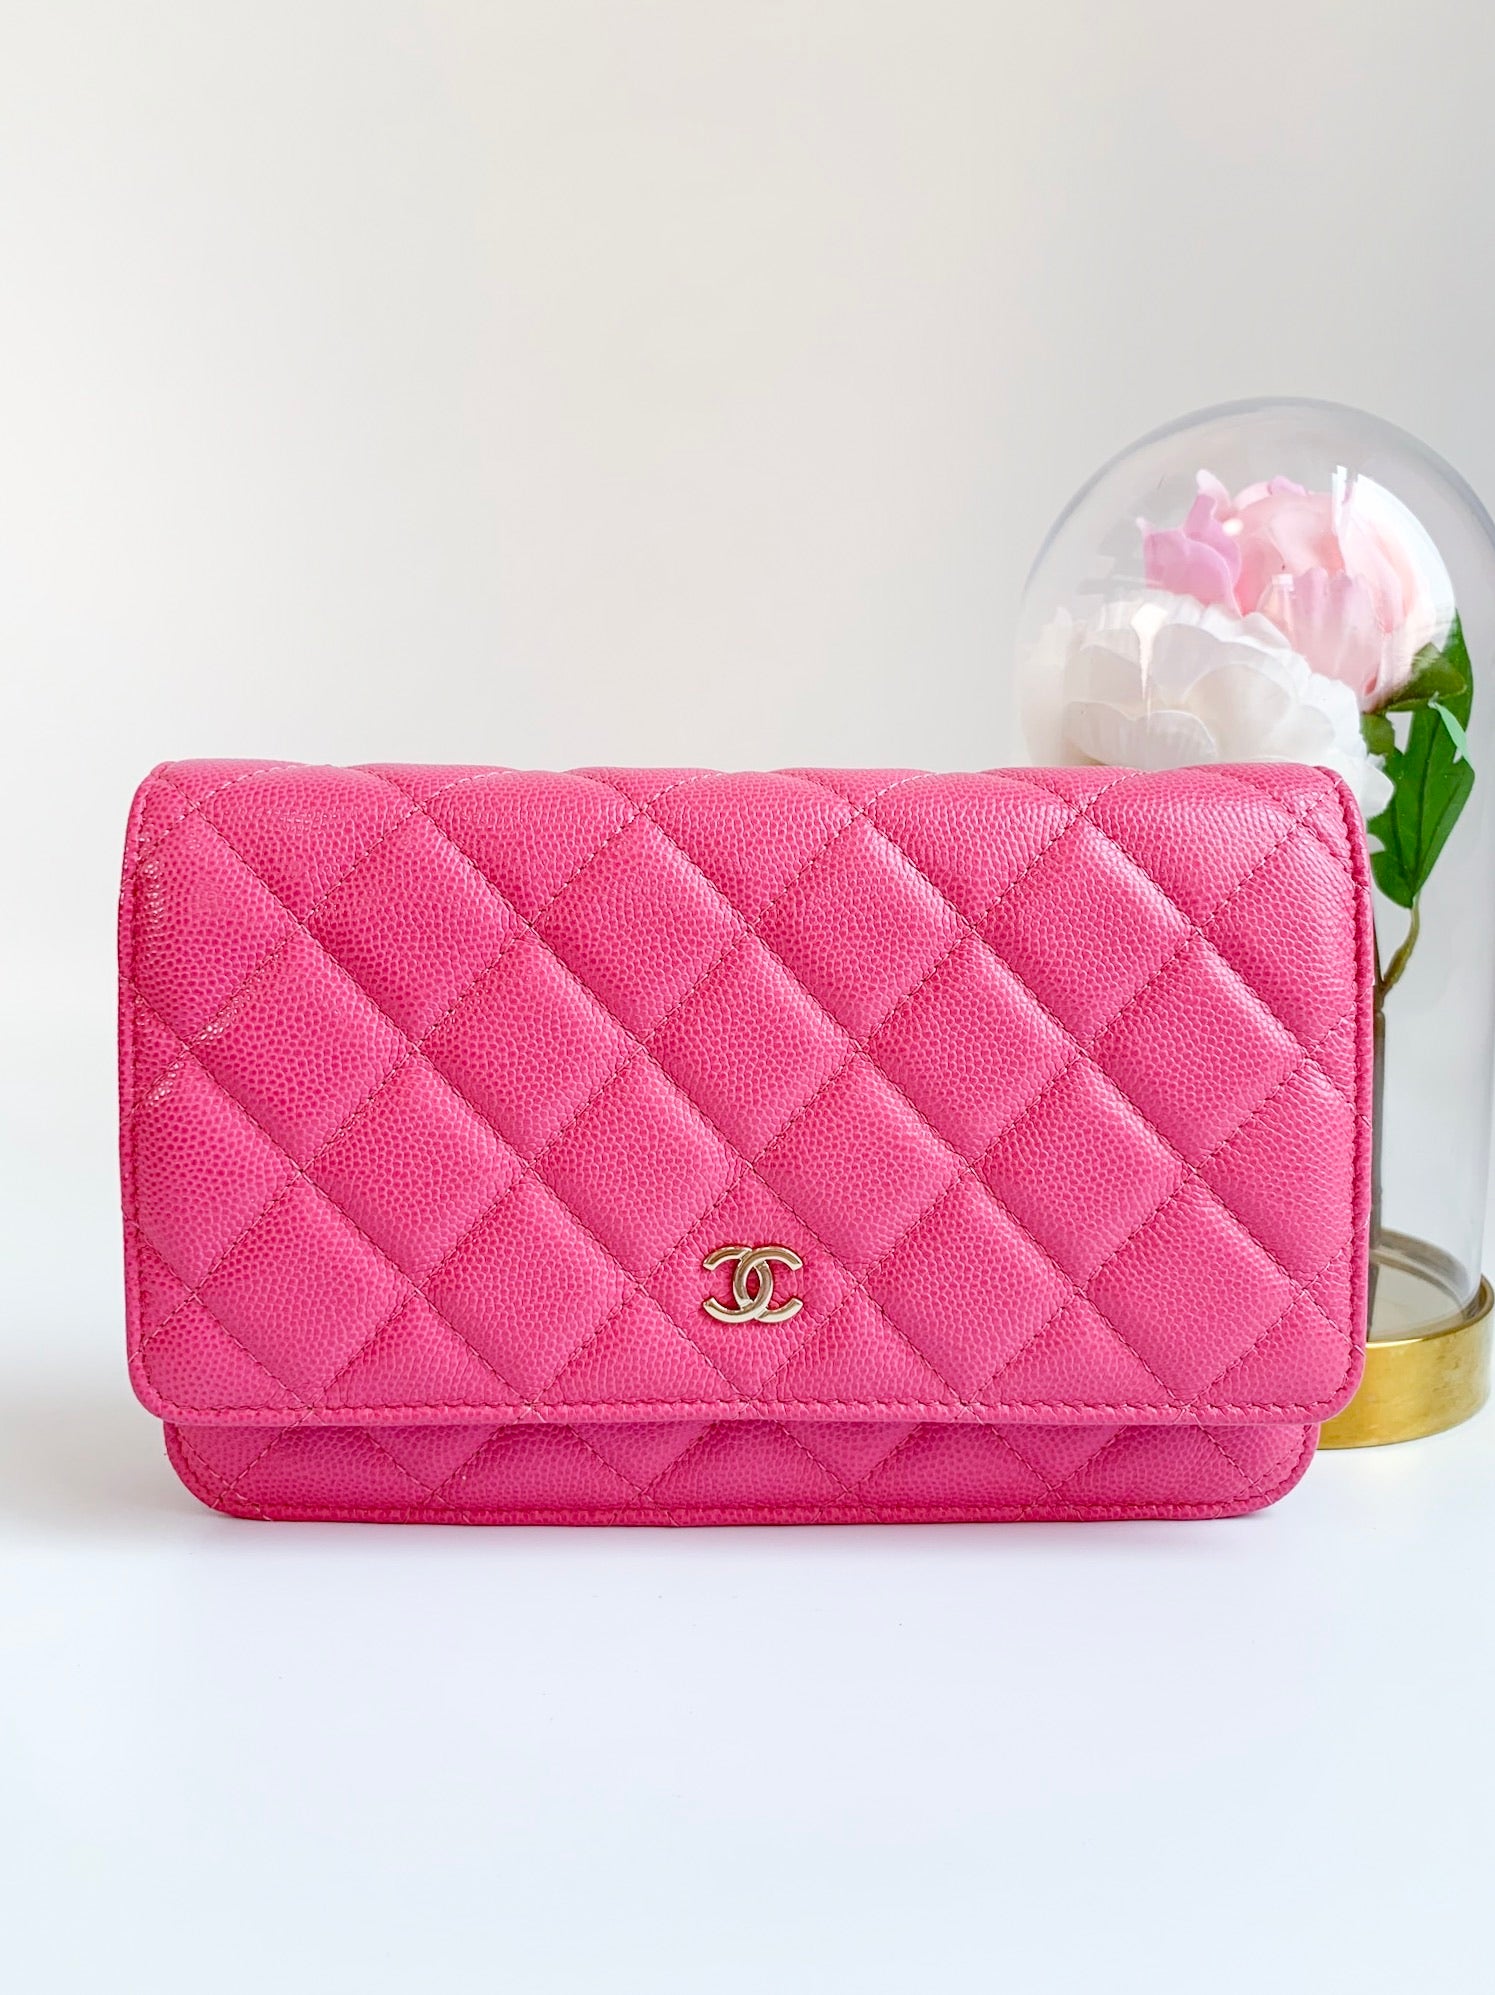 Shopping with Emmy Chanel Pink Rose Gold Bifold Quilted Wallet and the  GST  Bragmybag